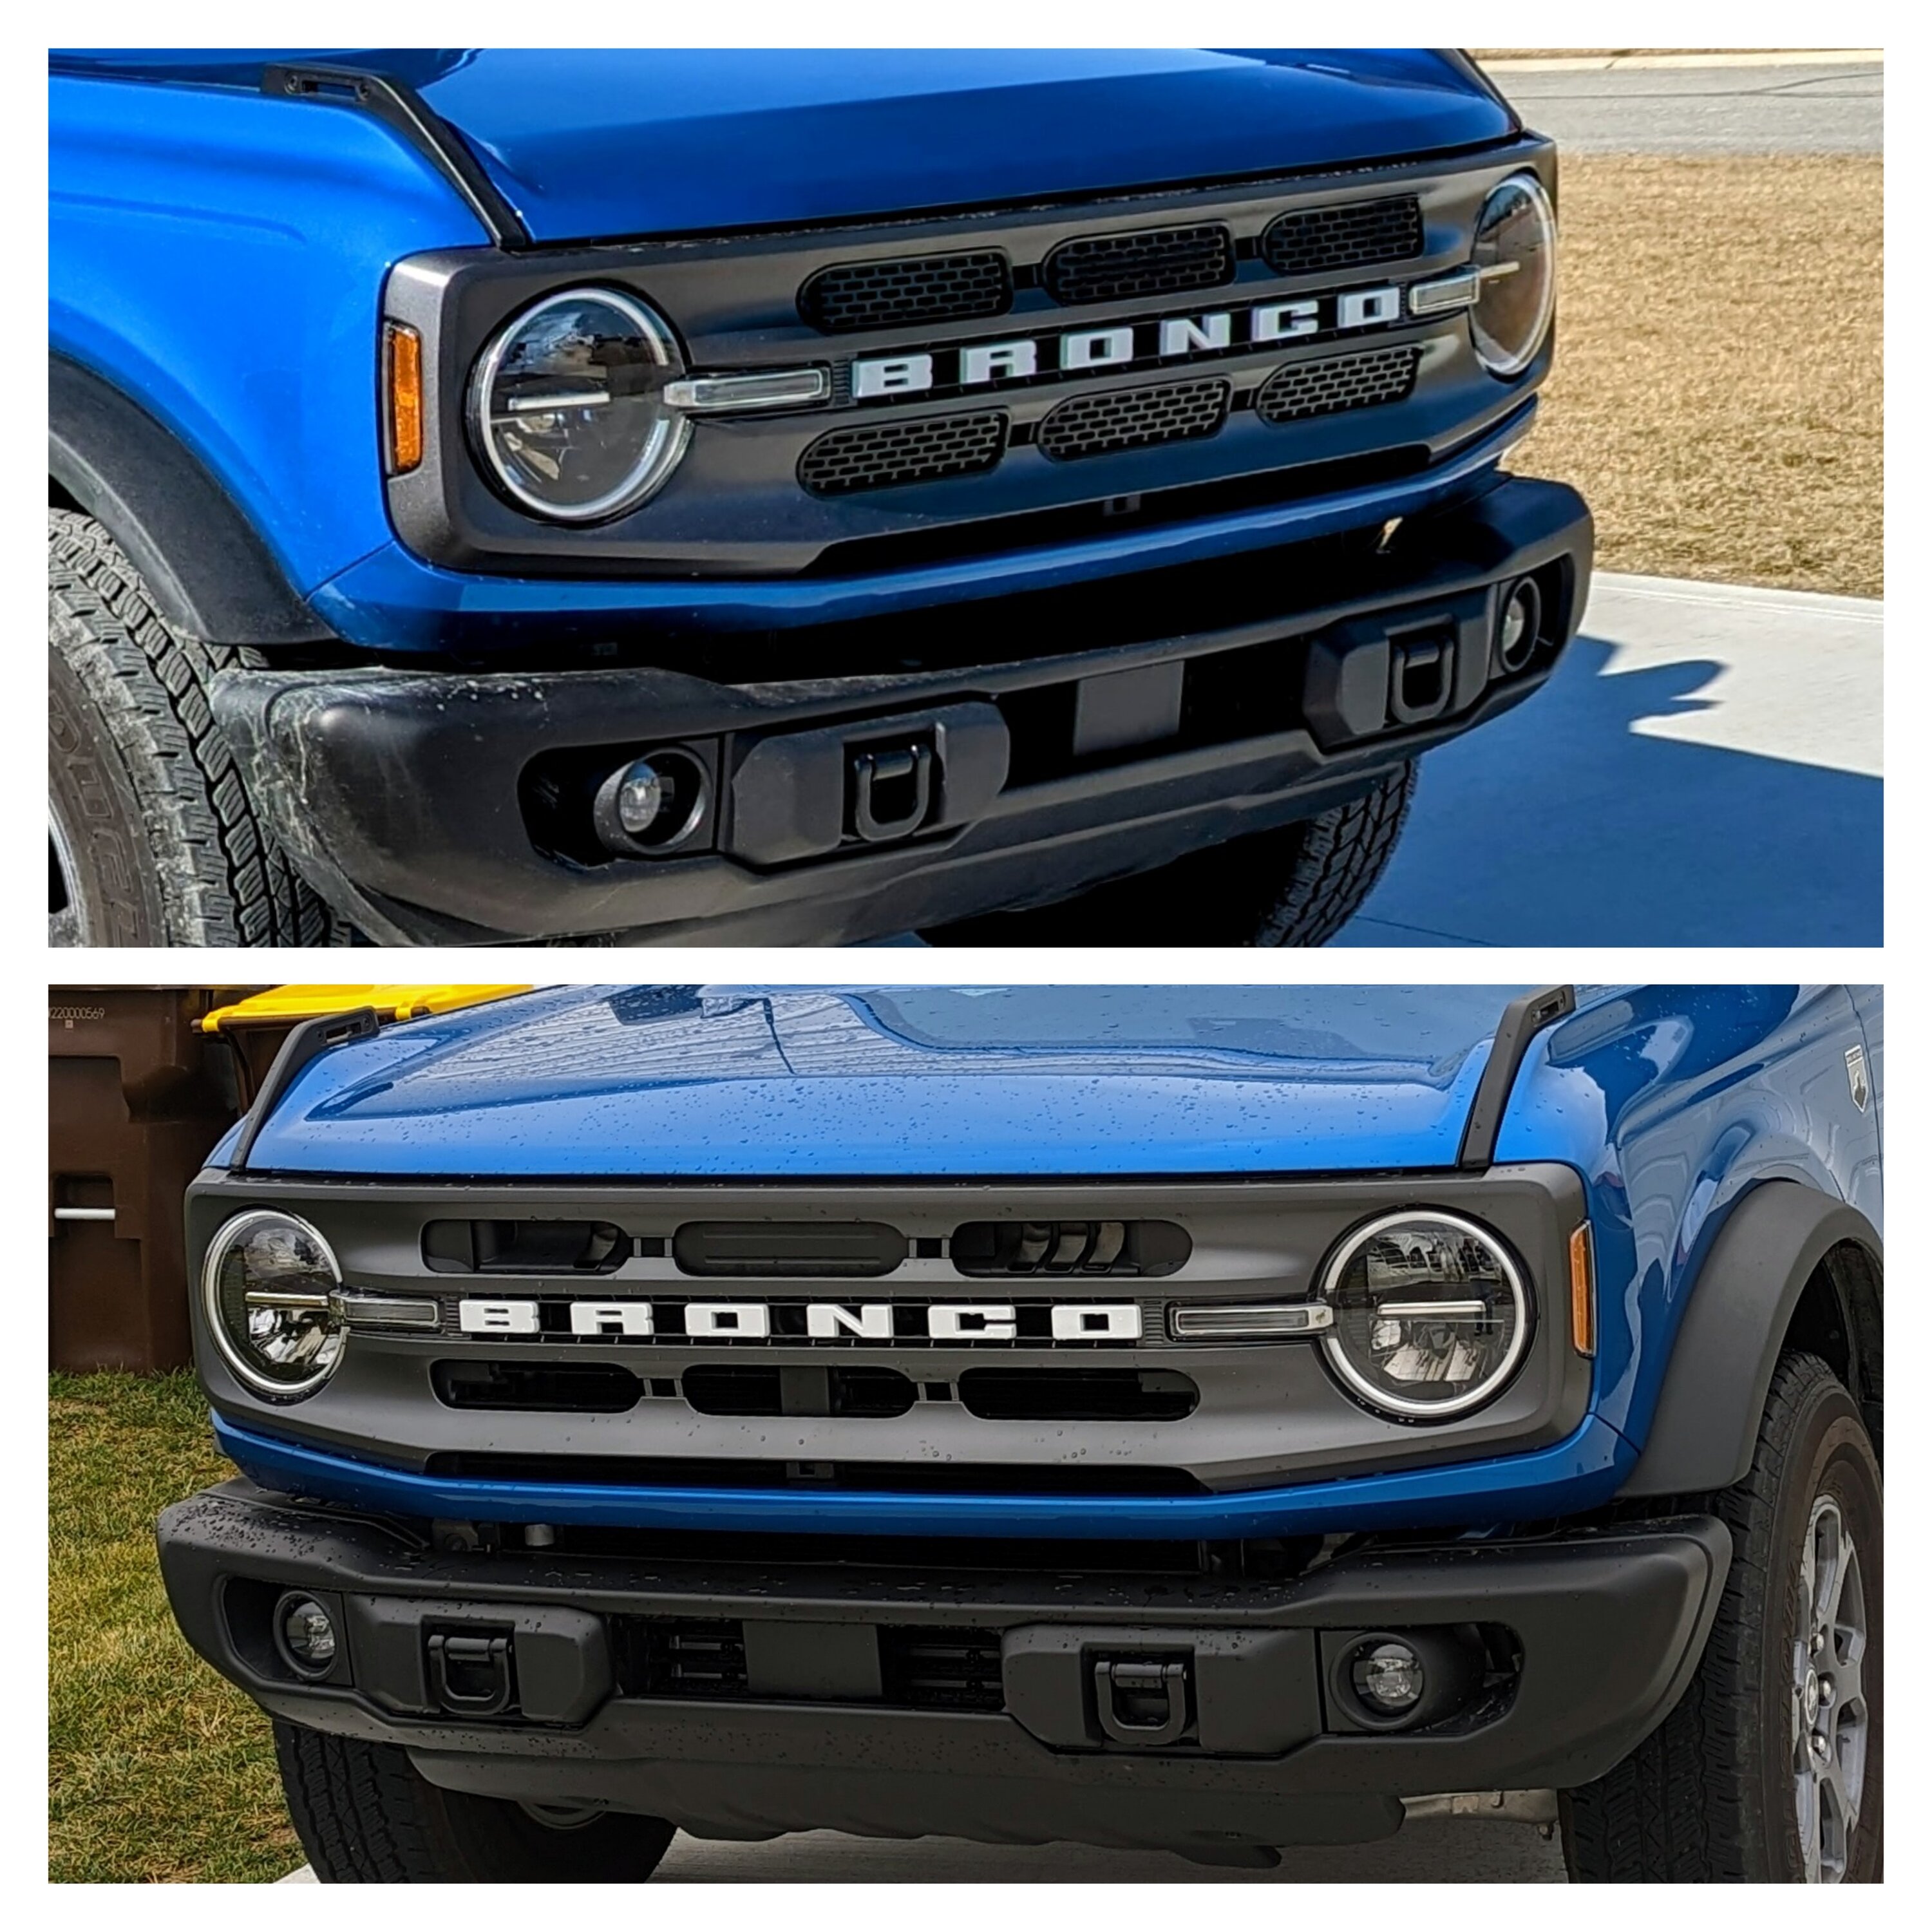 Mesh grill inserts installed on Big Bend